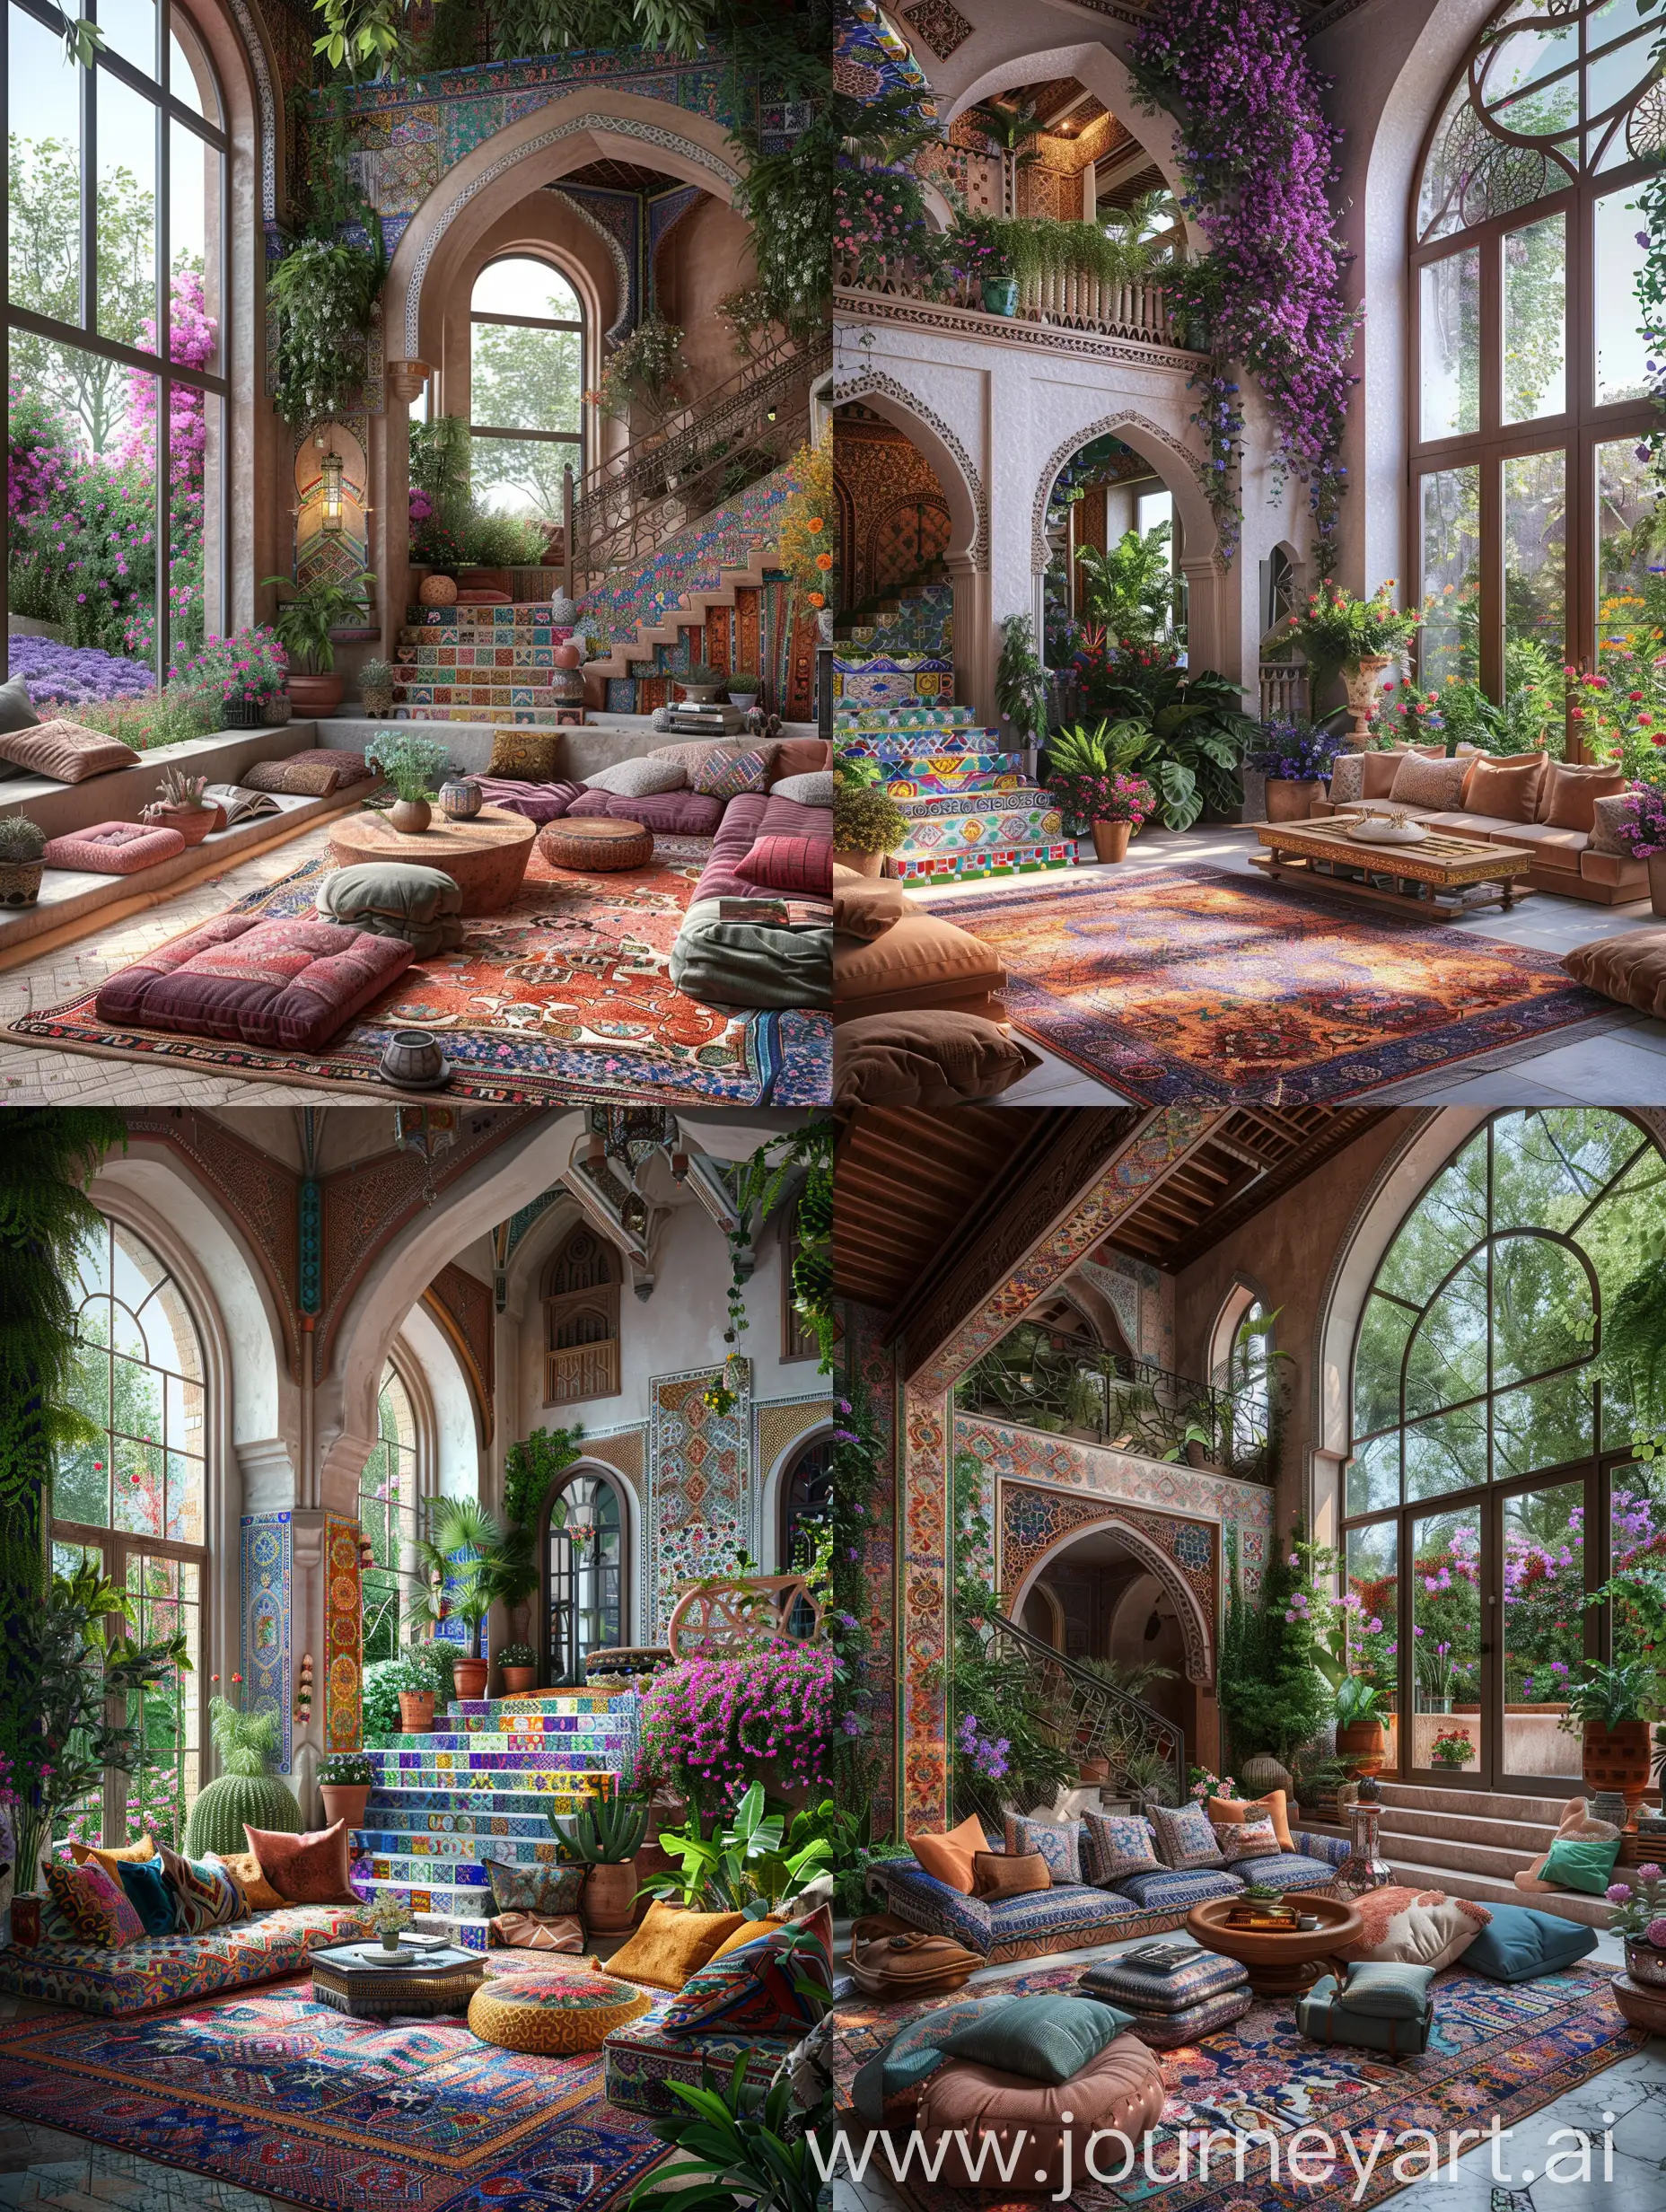 A beautiful and cozy living room in the style of an old arabian house with high ceilings, decorated with colorful moroccan tiles and boho decoration including some potted plants, surrounded by a lush garden with flowers, with stairs leading to outdoors, big windows overlooking the garden, soft natural light, hyper realistic photography --chaos 2 --s 300